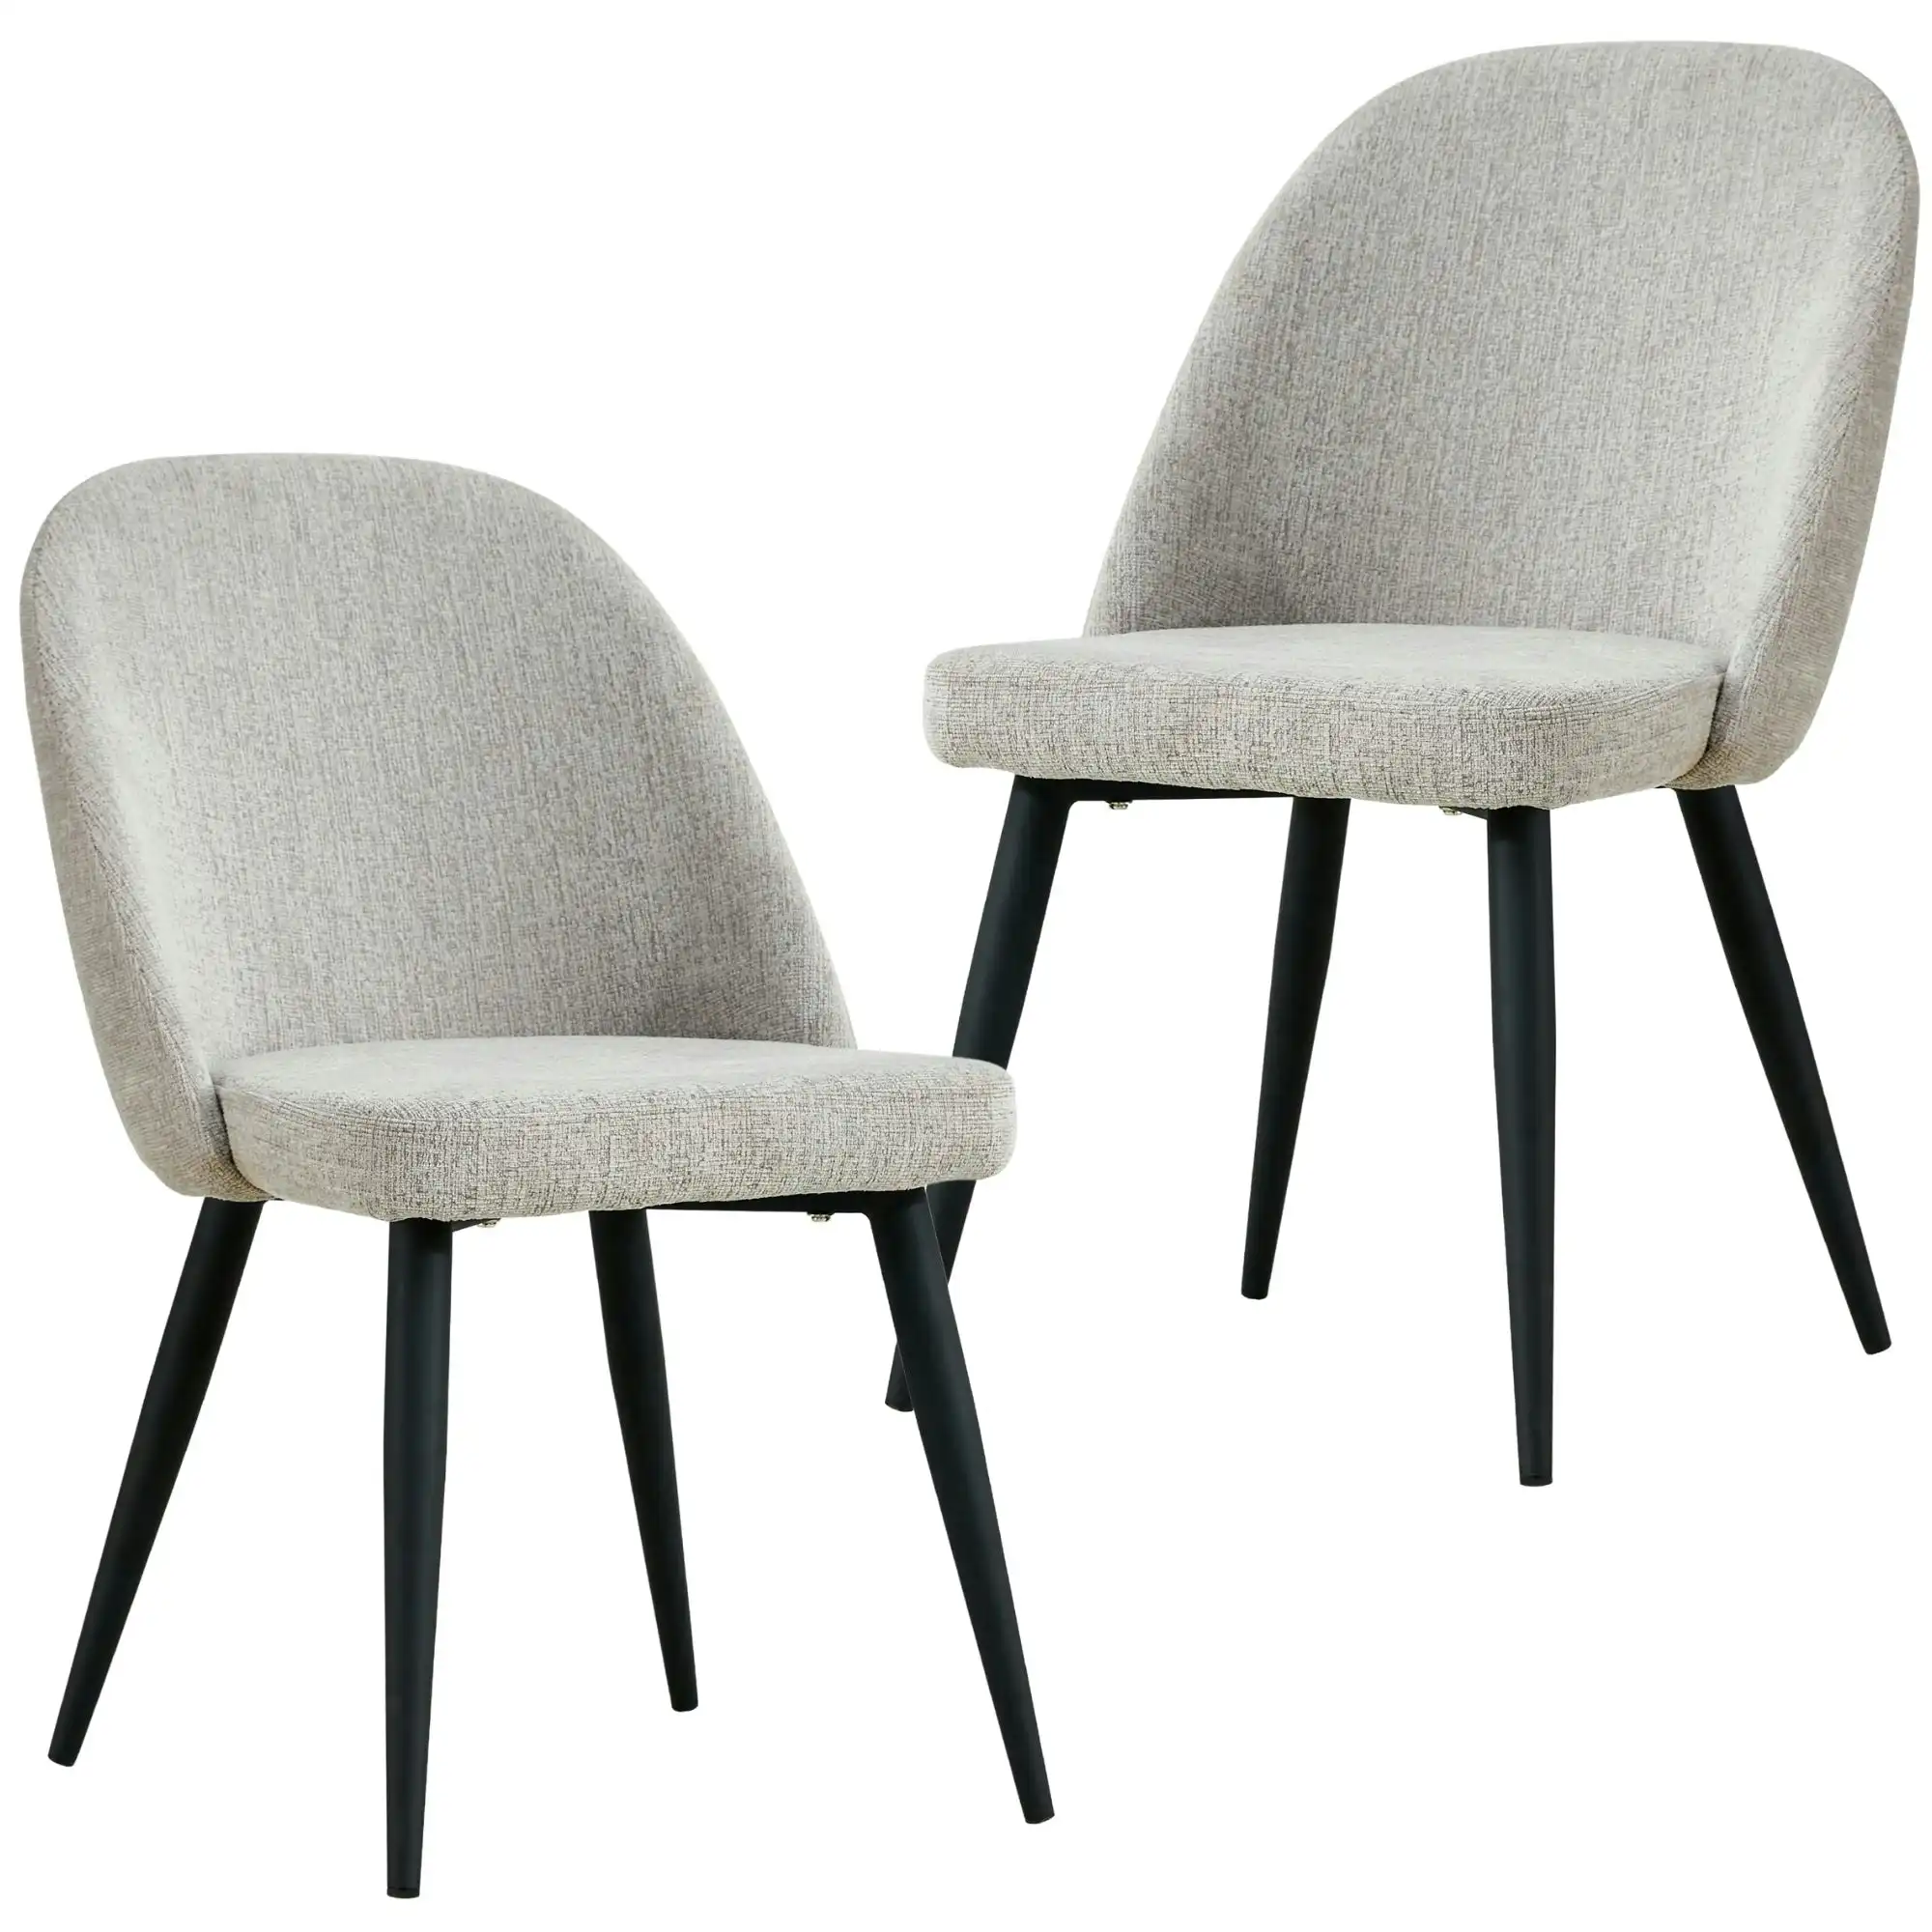 Erin Set of 2 Dining Chair